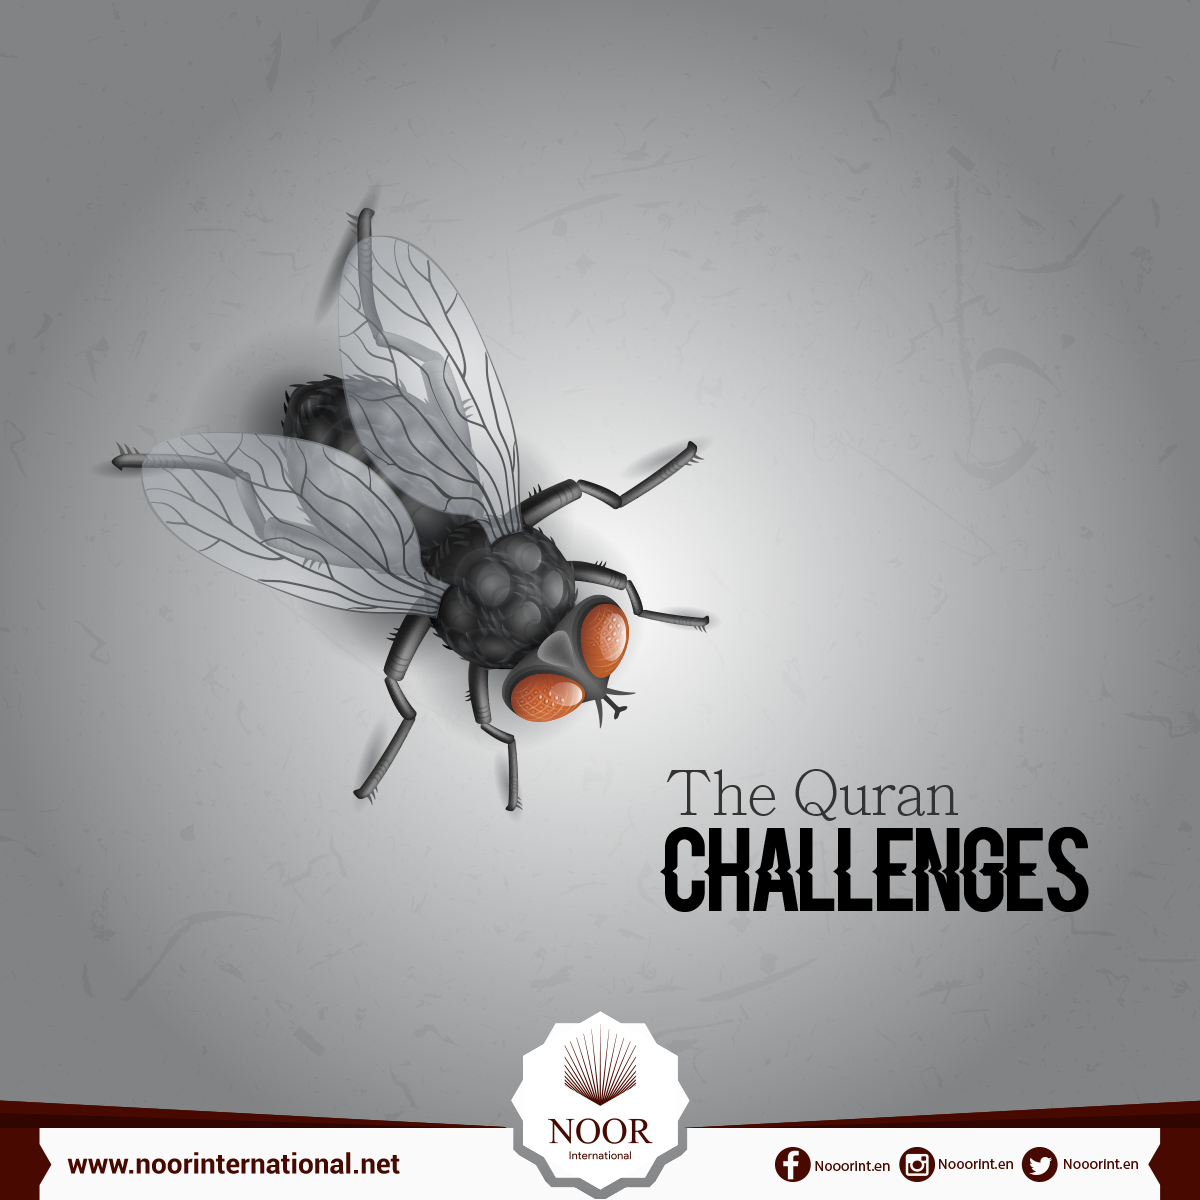 The Quran challenges